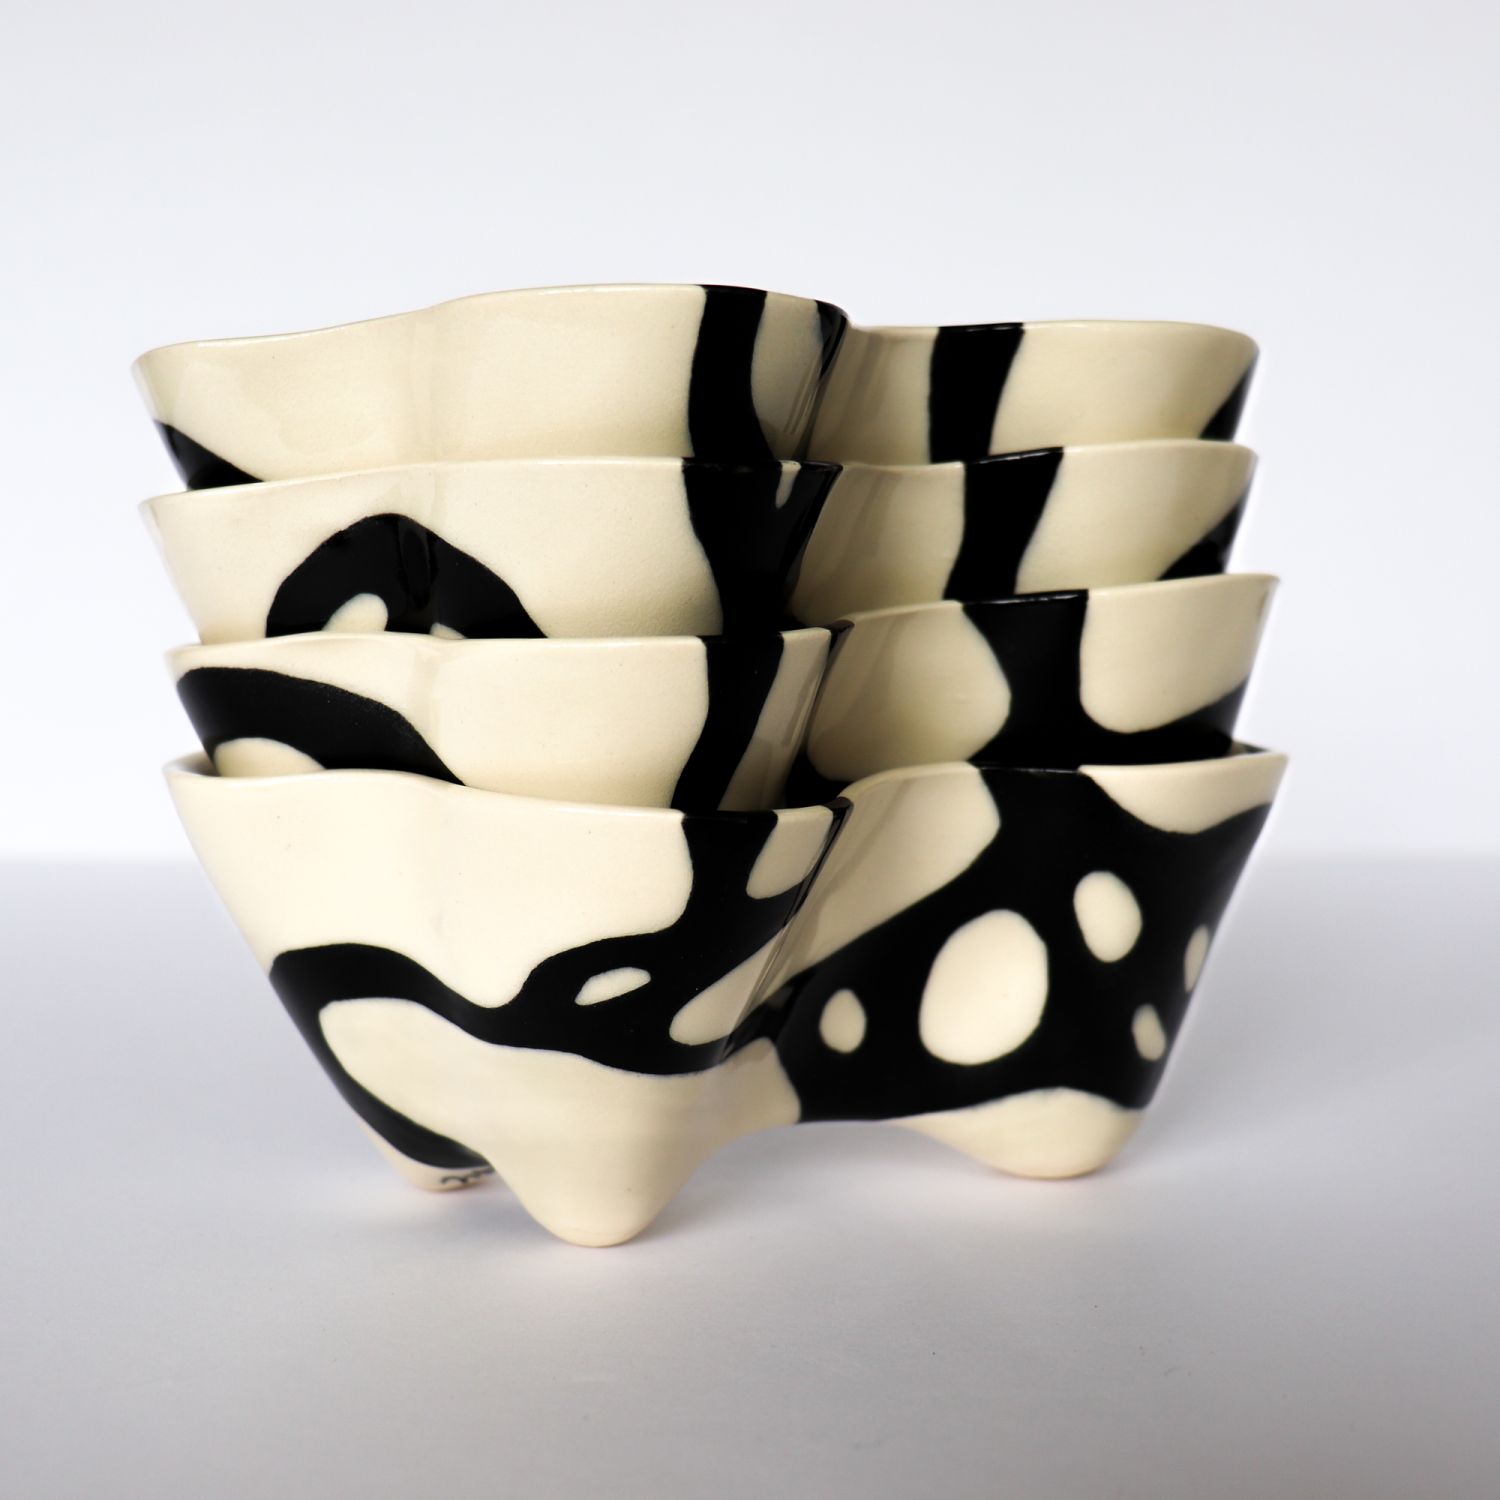 Alana Marcoccia: Interconnected Sculptural Bowl Product Image 2 of 12